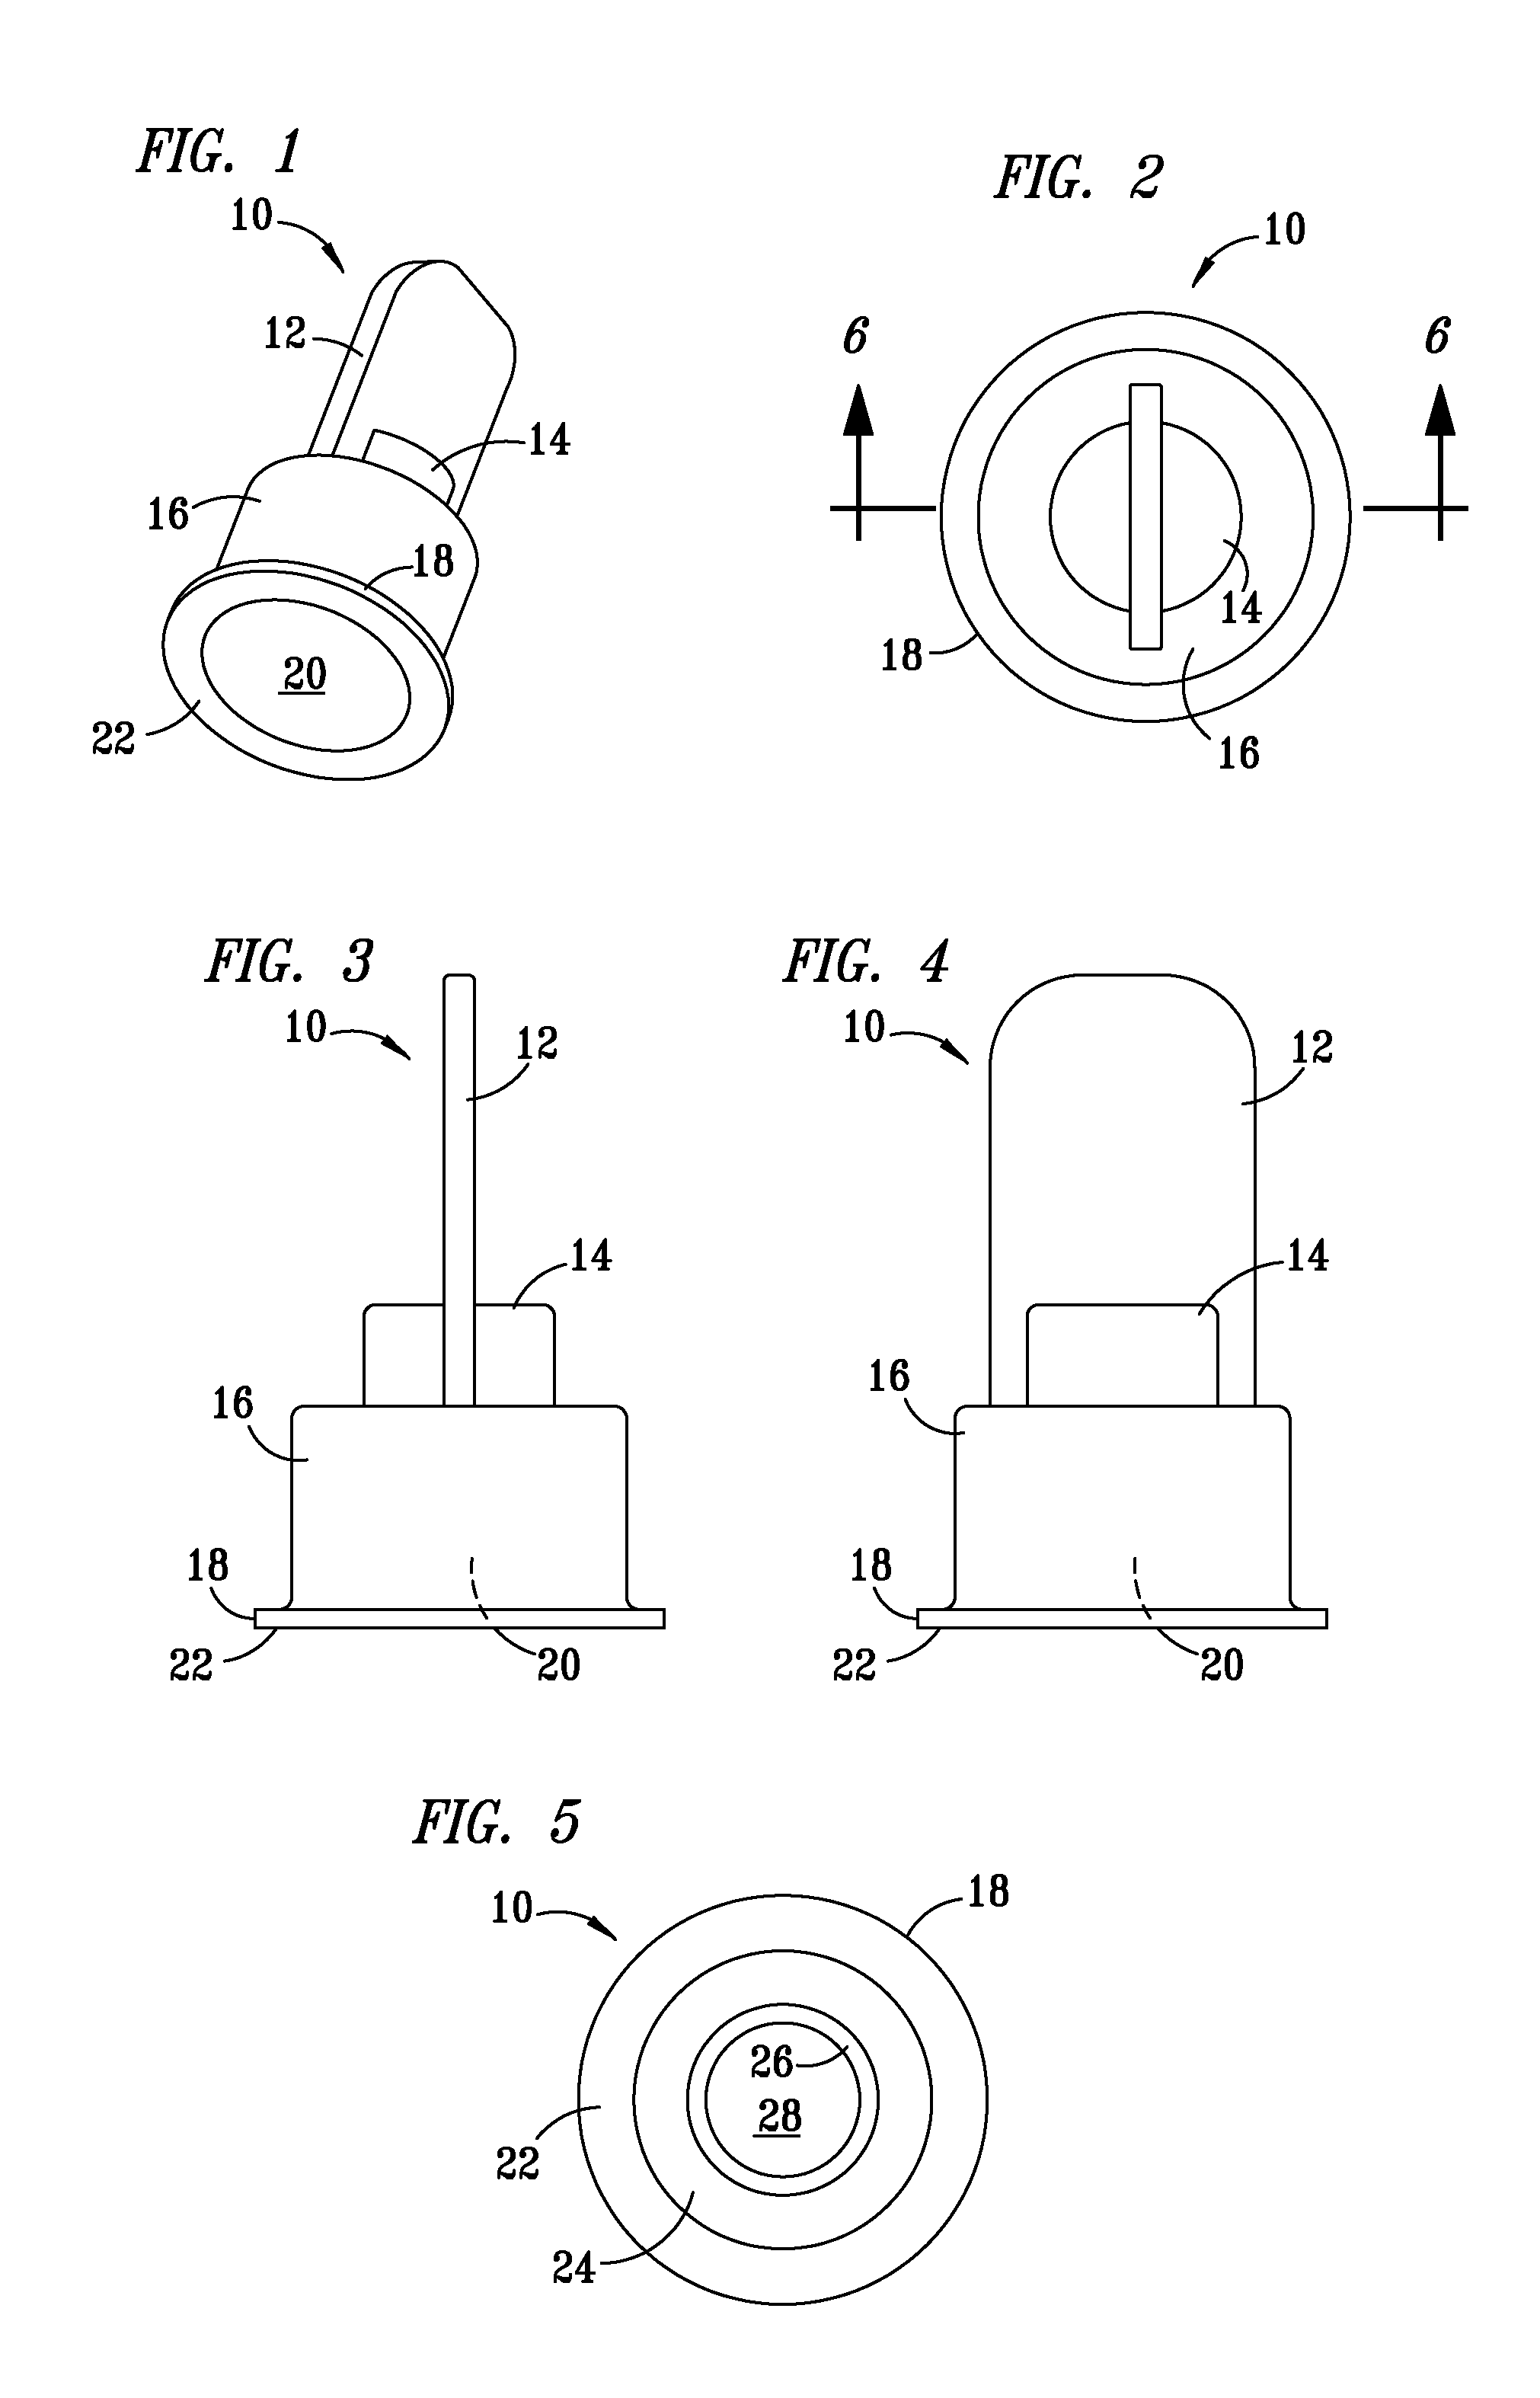 Cleaning Tool for Attachment Surfaces